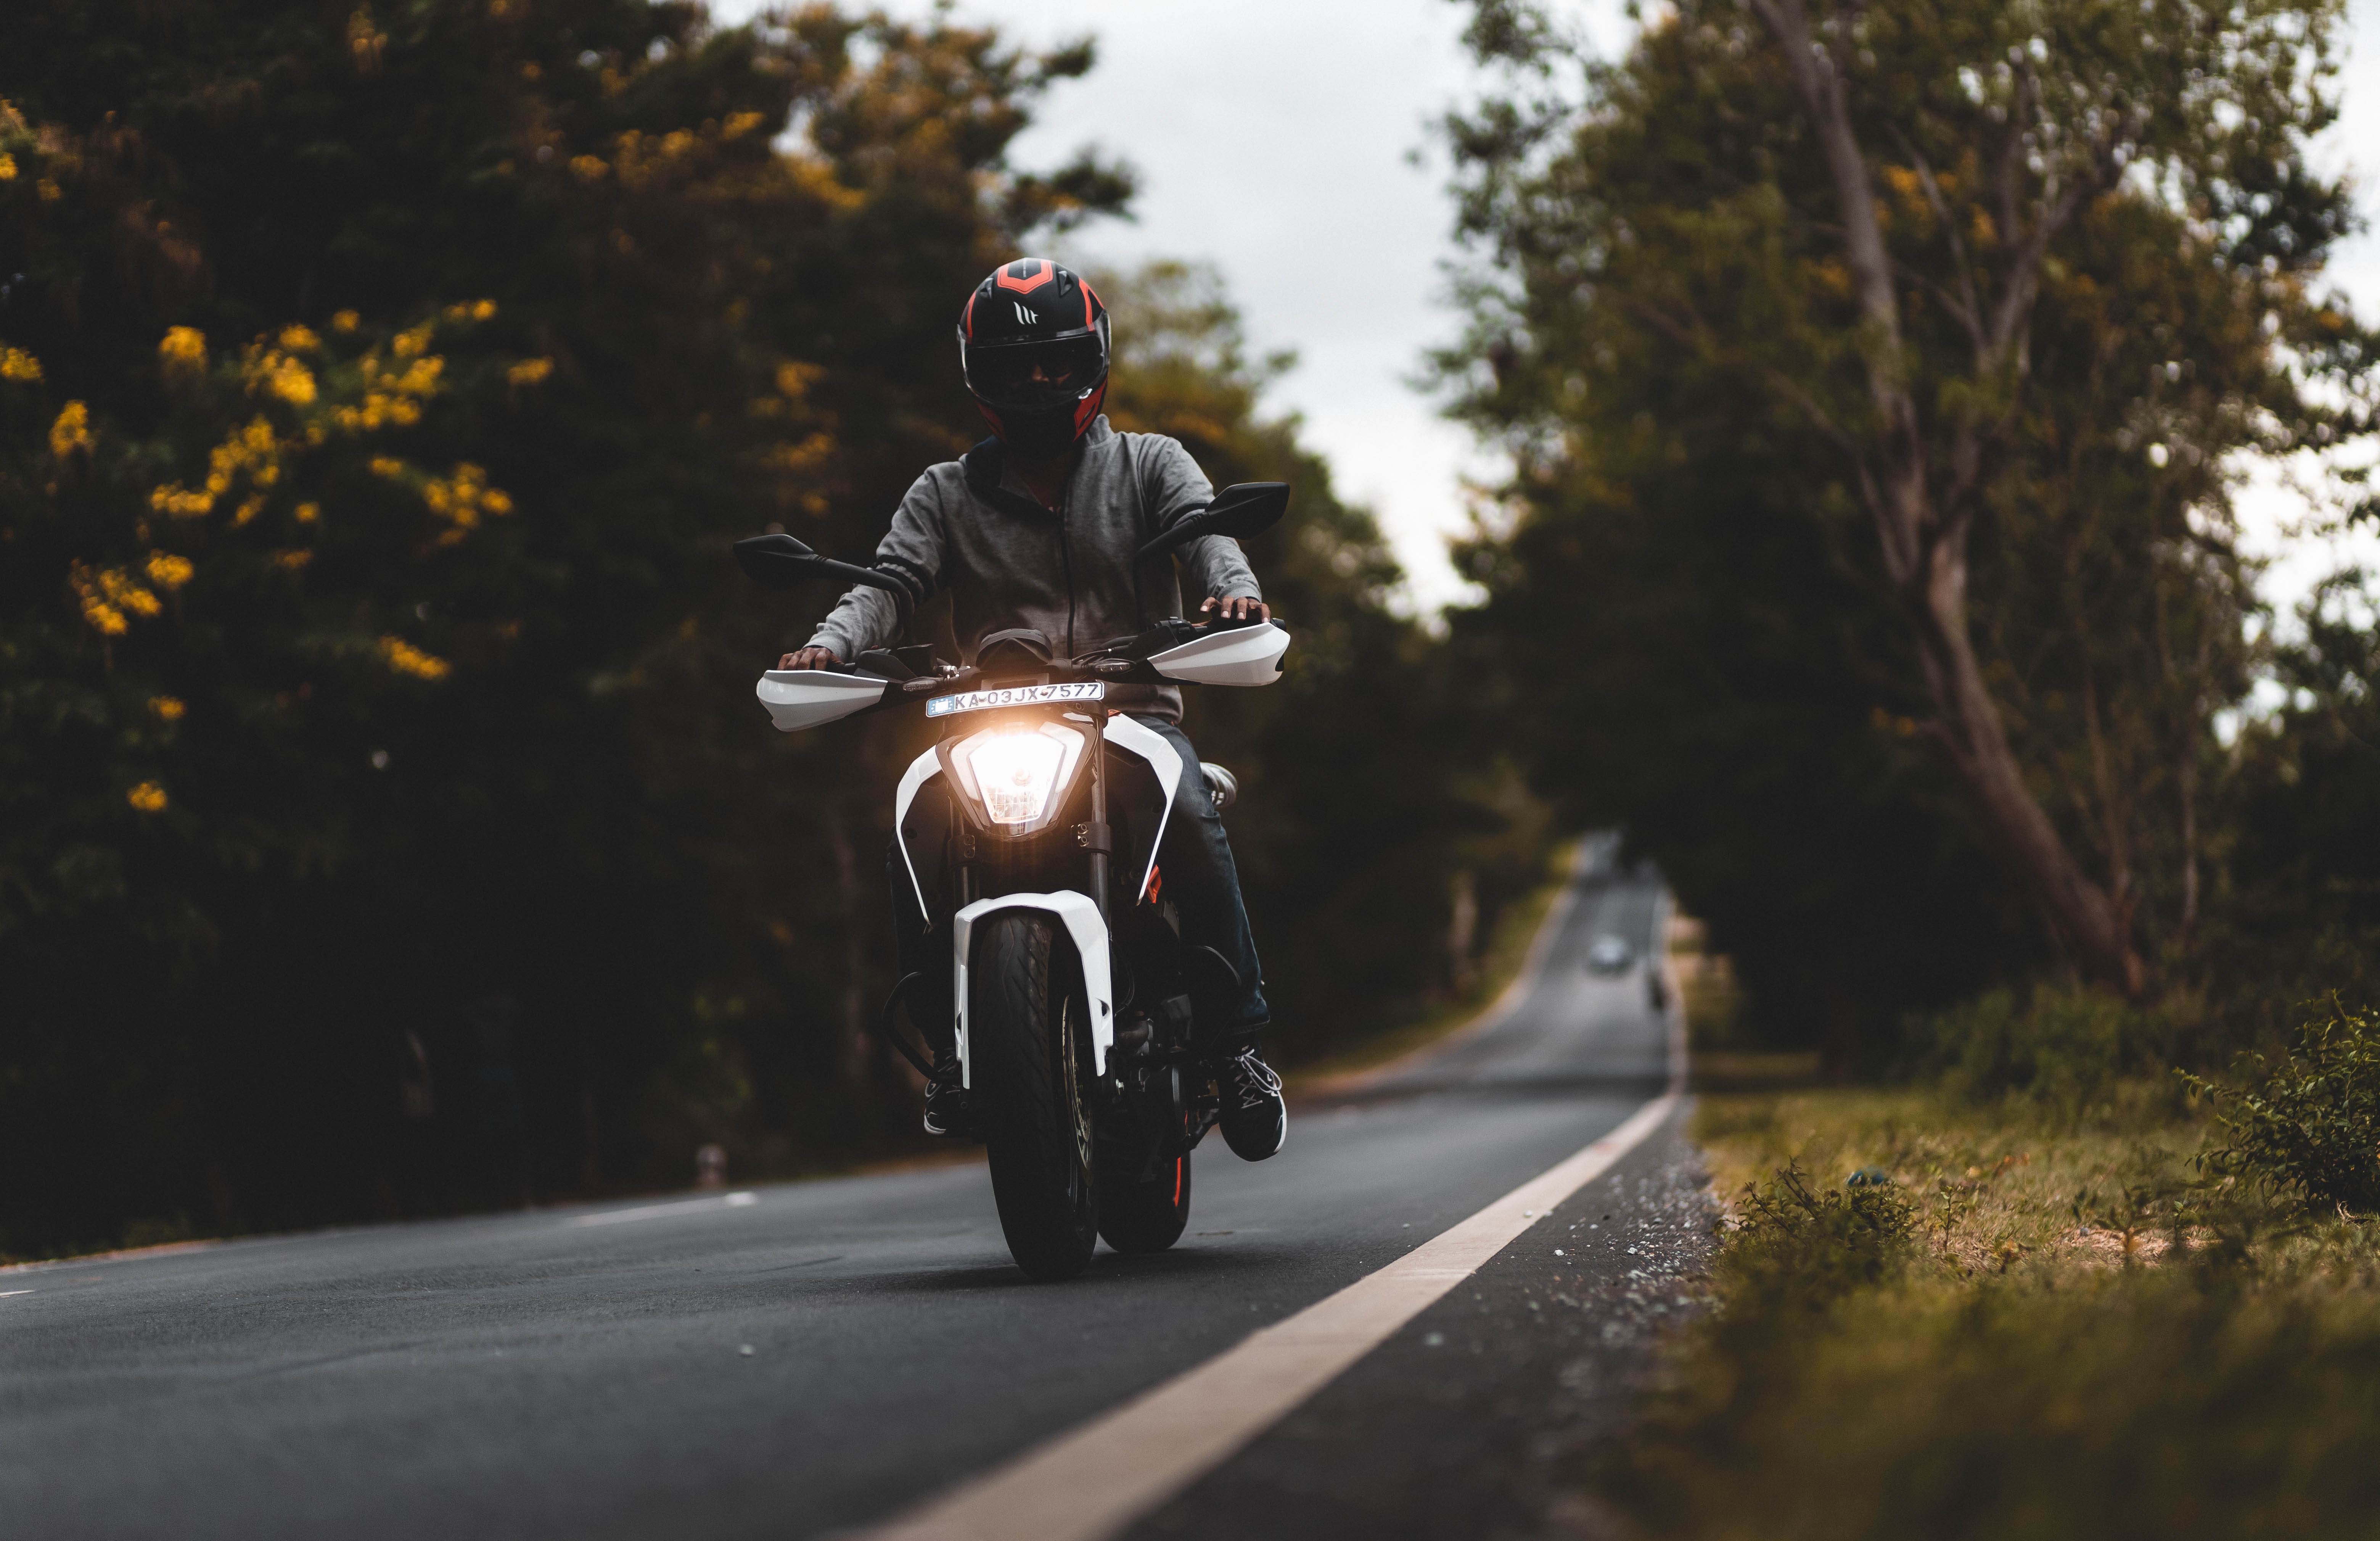 149112 Screensavers and Wallpapers Motorcyclist for phone. Download motorcyclist, trees, motorcycles, white, road, motorcycle pictures for free